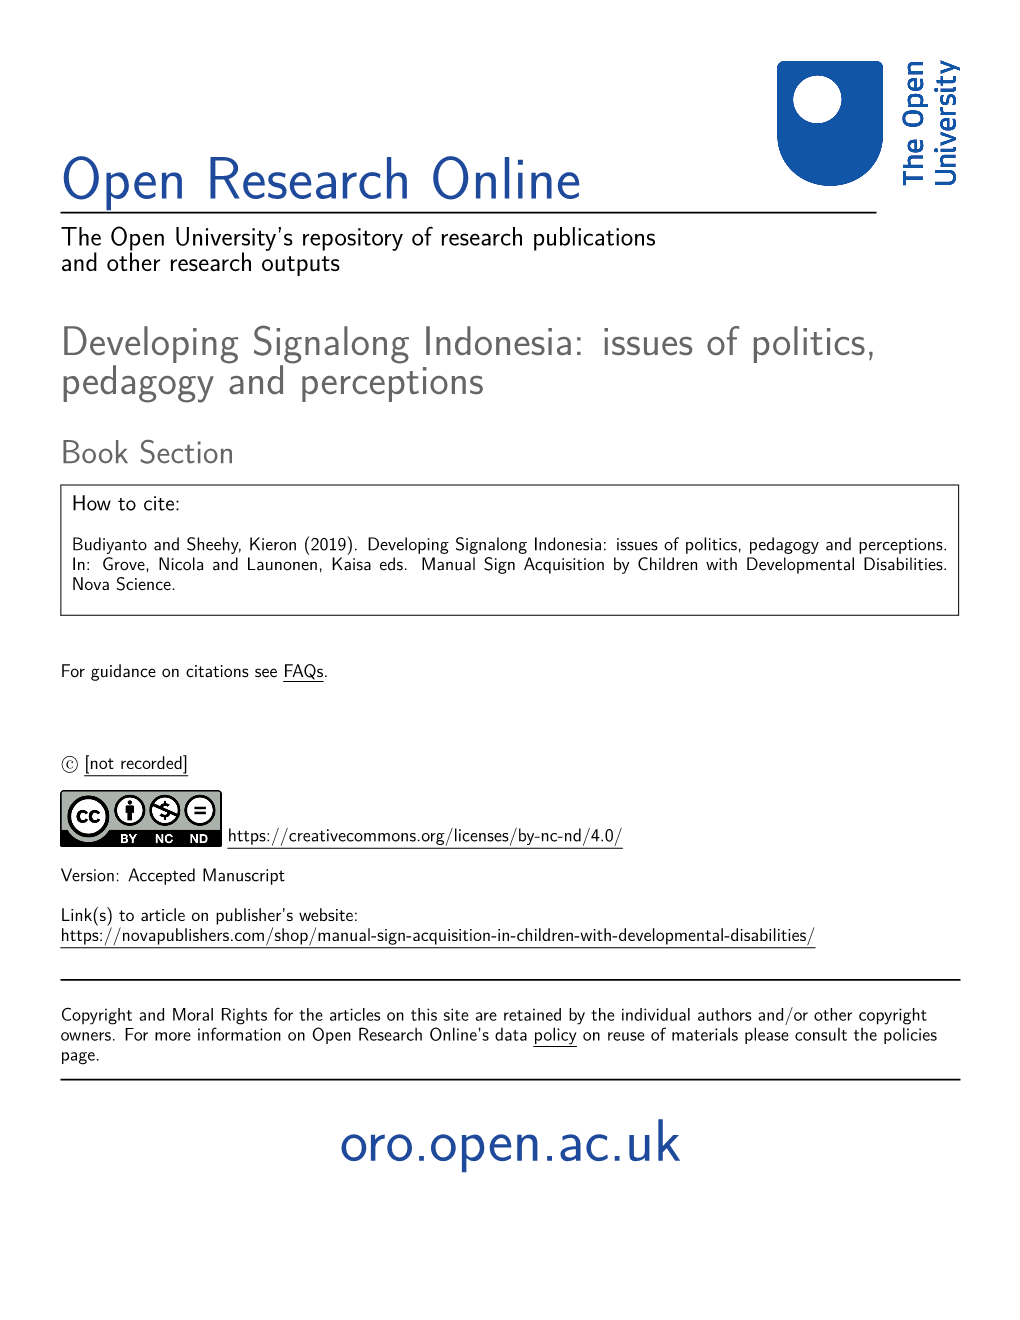 Developing Signalong Indonesia: Issues of Politics, Pedagogy and Perceptions